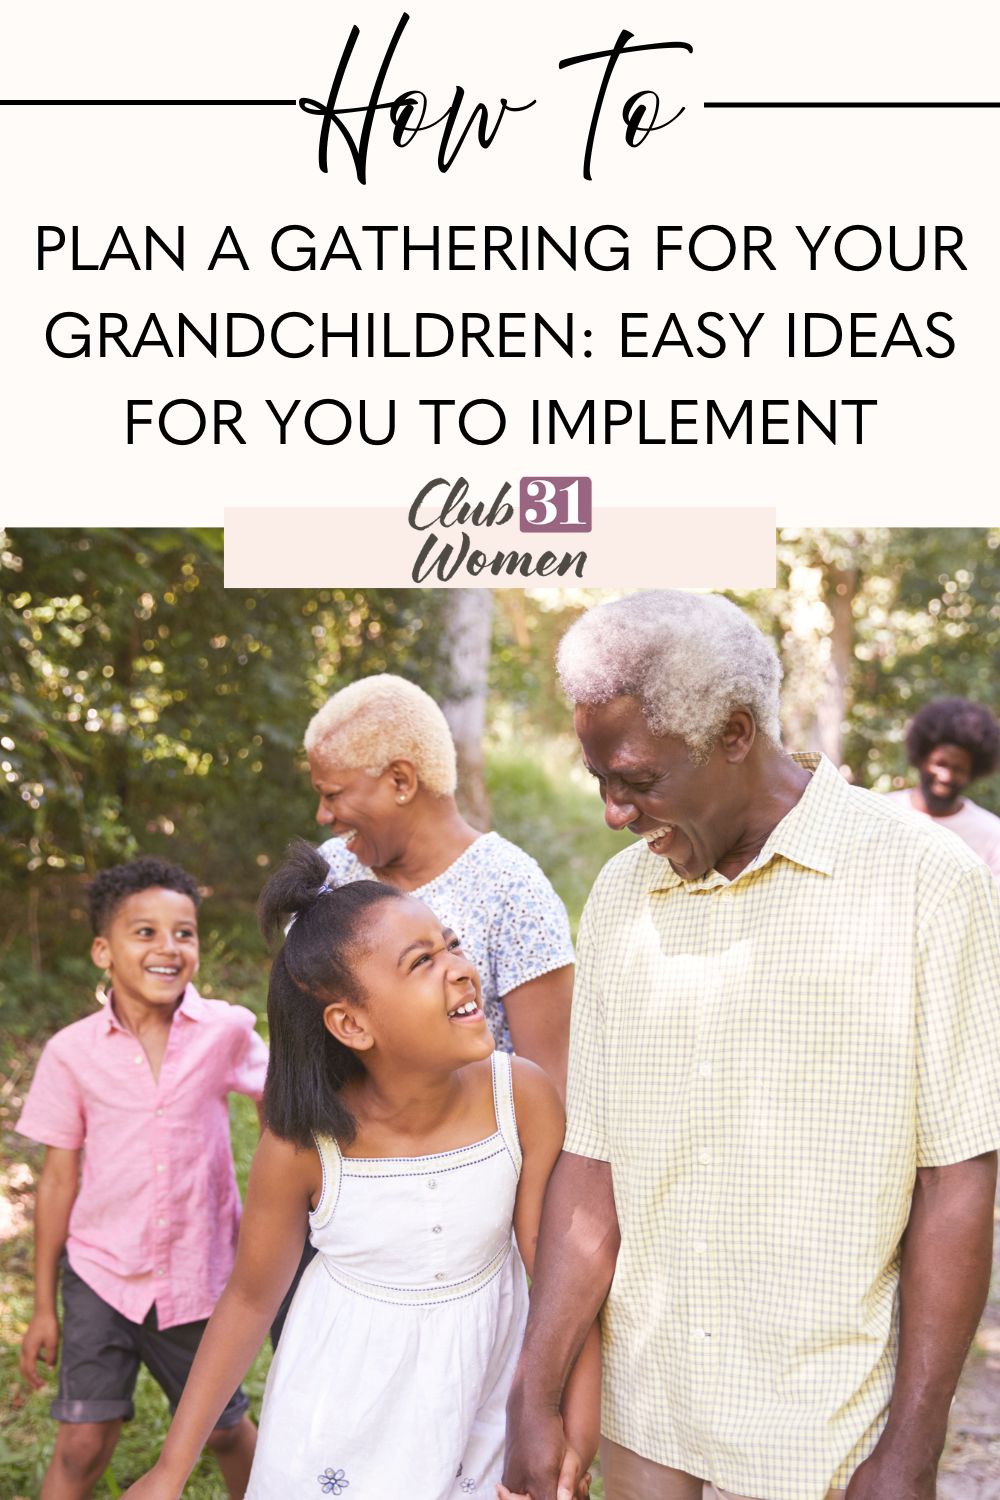 See what a blessing it is to gather your grandchildren together in one place for a fun time of relationship-building and great fun!! via @Club31Women